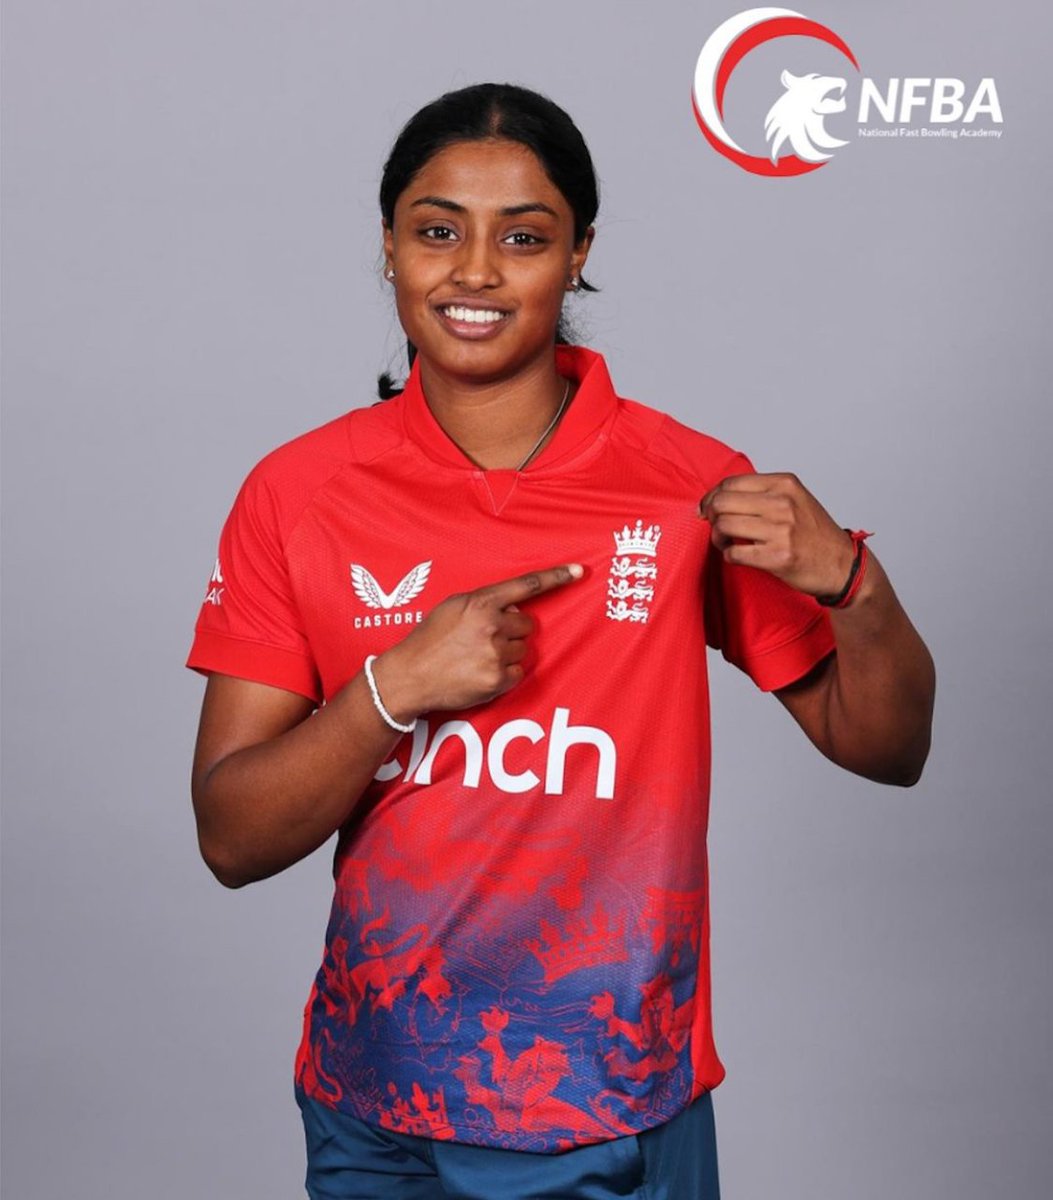 💫 British Tamil teenager makes history with debut for England cricket team British Tamil teenager Amuruthaa Surenkumar made history as the first professional Tamil cricketer to represent the English national team last week, making her debut in an under-19 match against Sri…